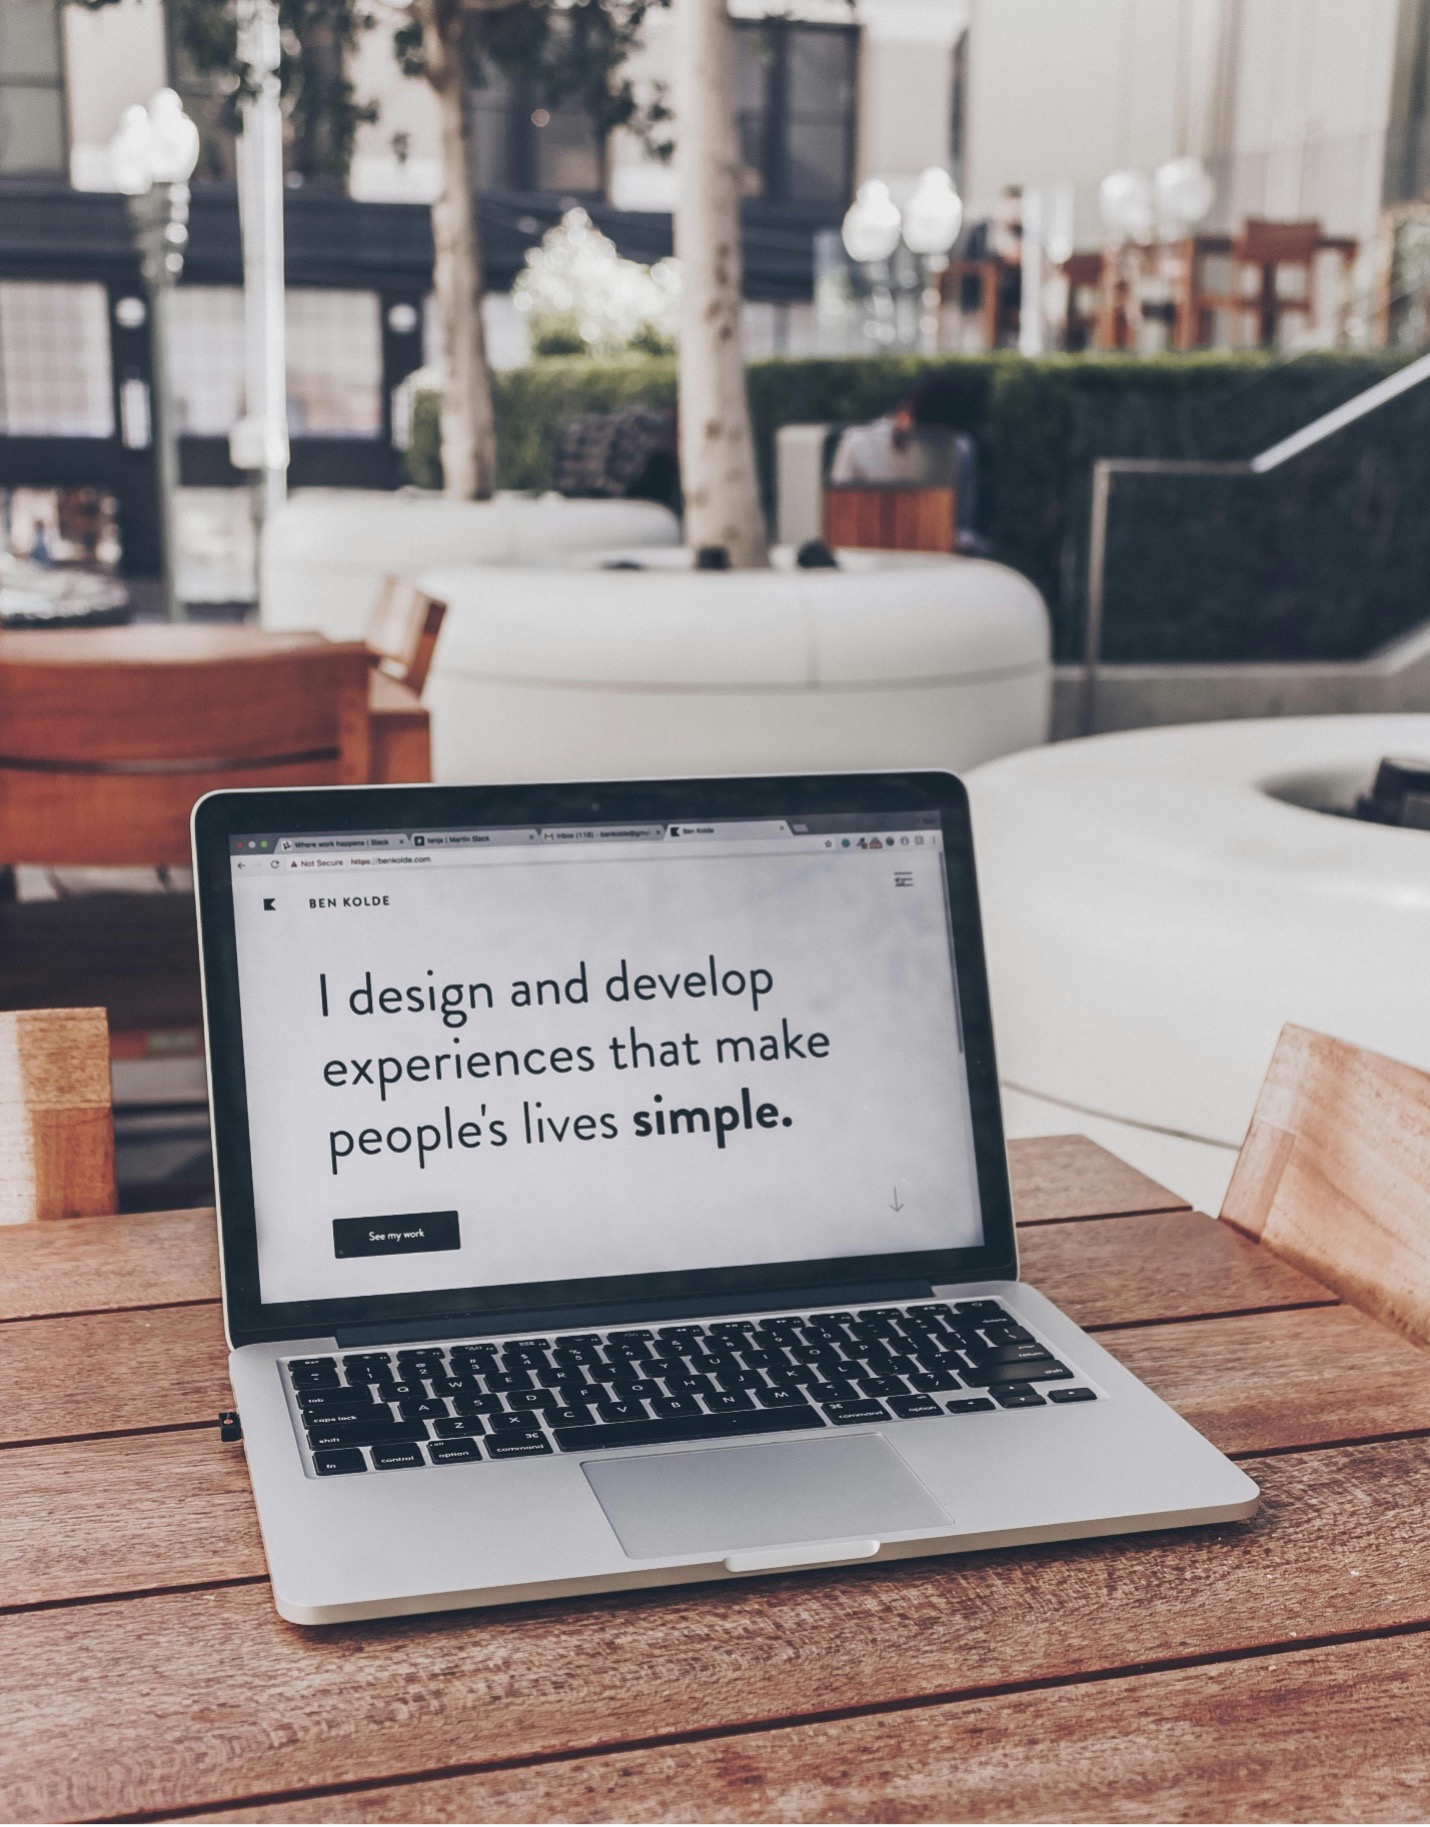 Photo of a laptop on a table in a restaurant with the words "I design and develop experiences that make people's lives simple" on the screen.